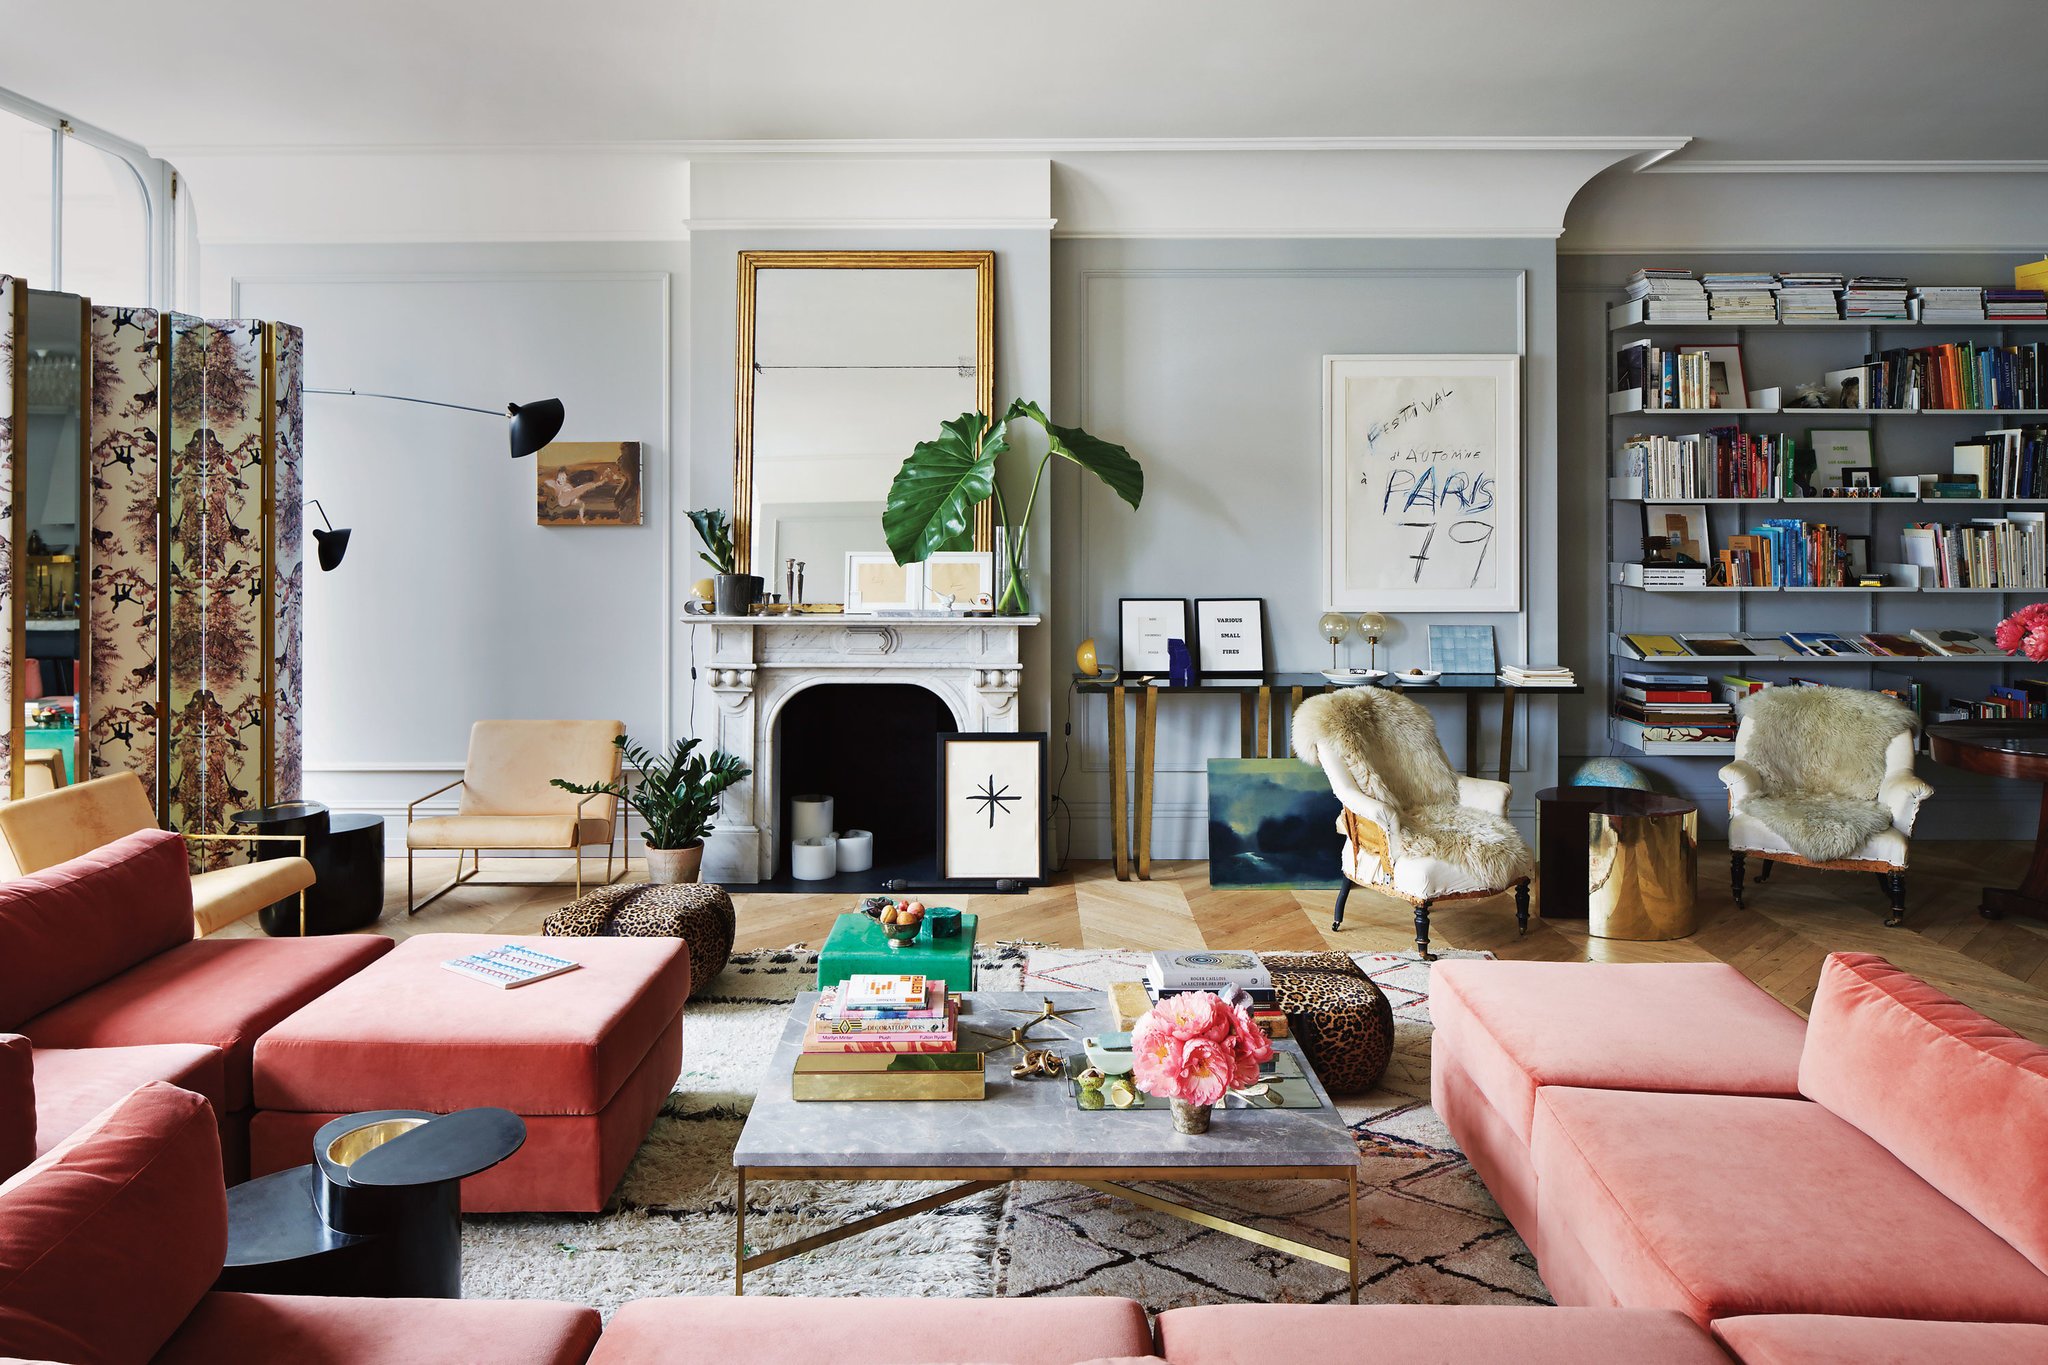 pink velvet modular sofa in a classic living room | jenna lyons house tour on coco kelley